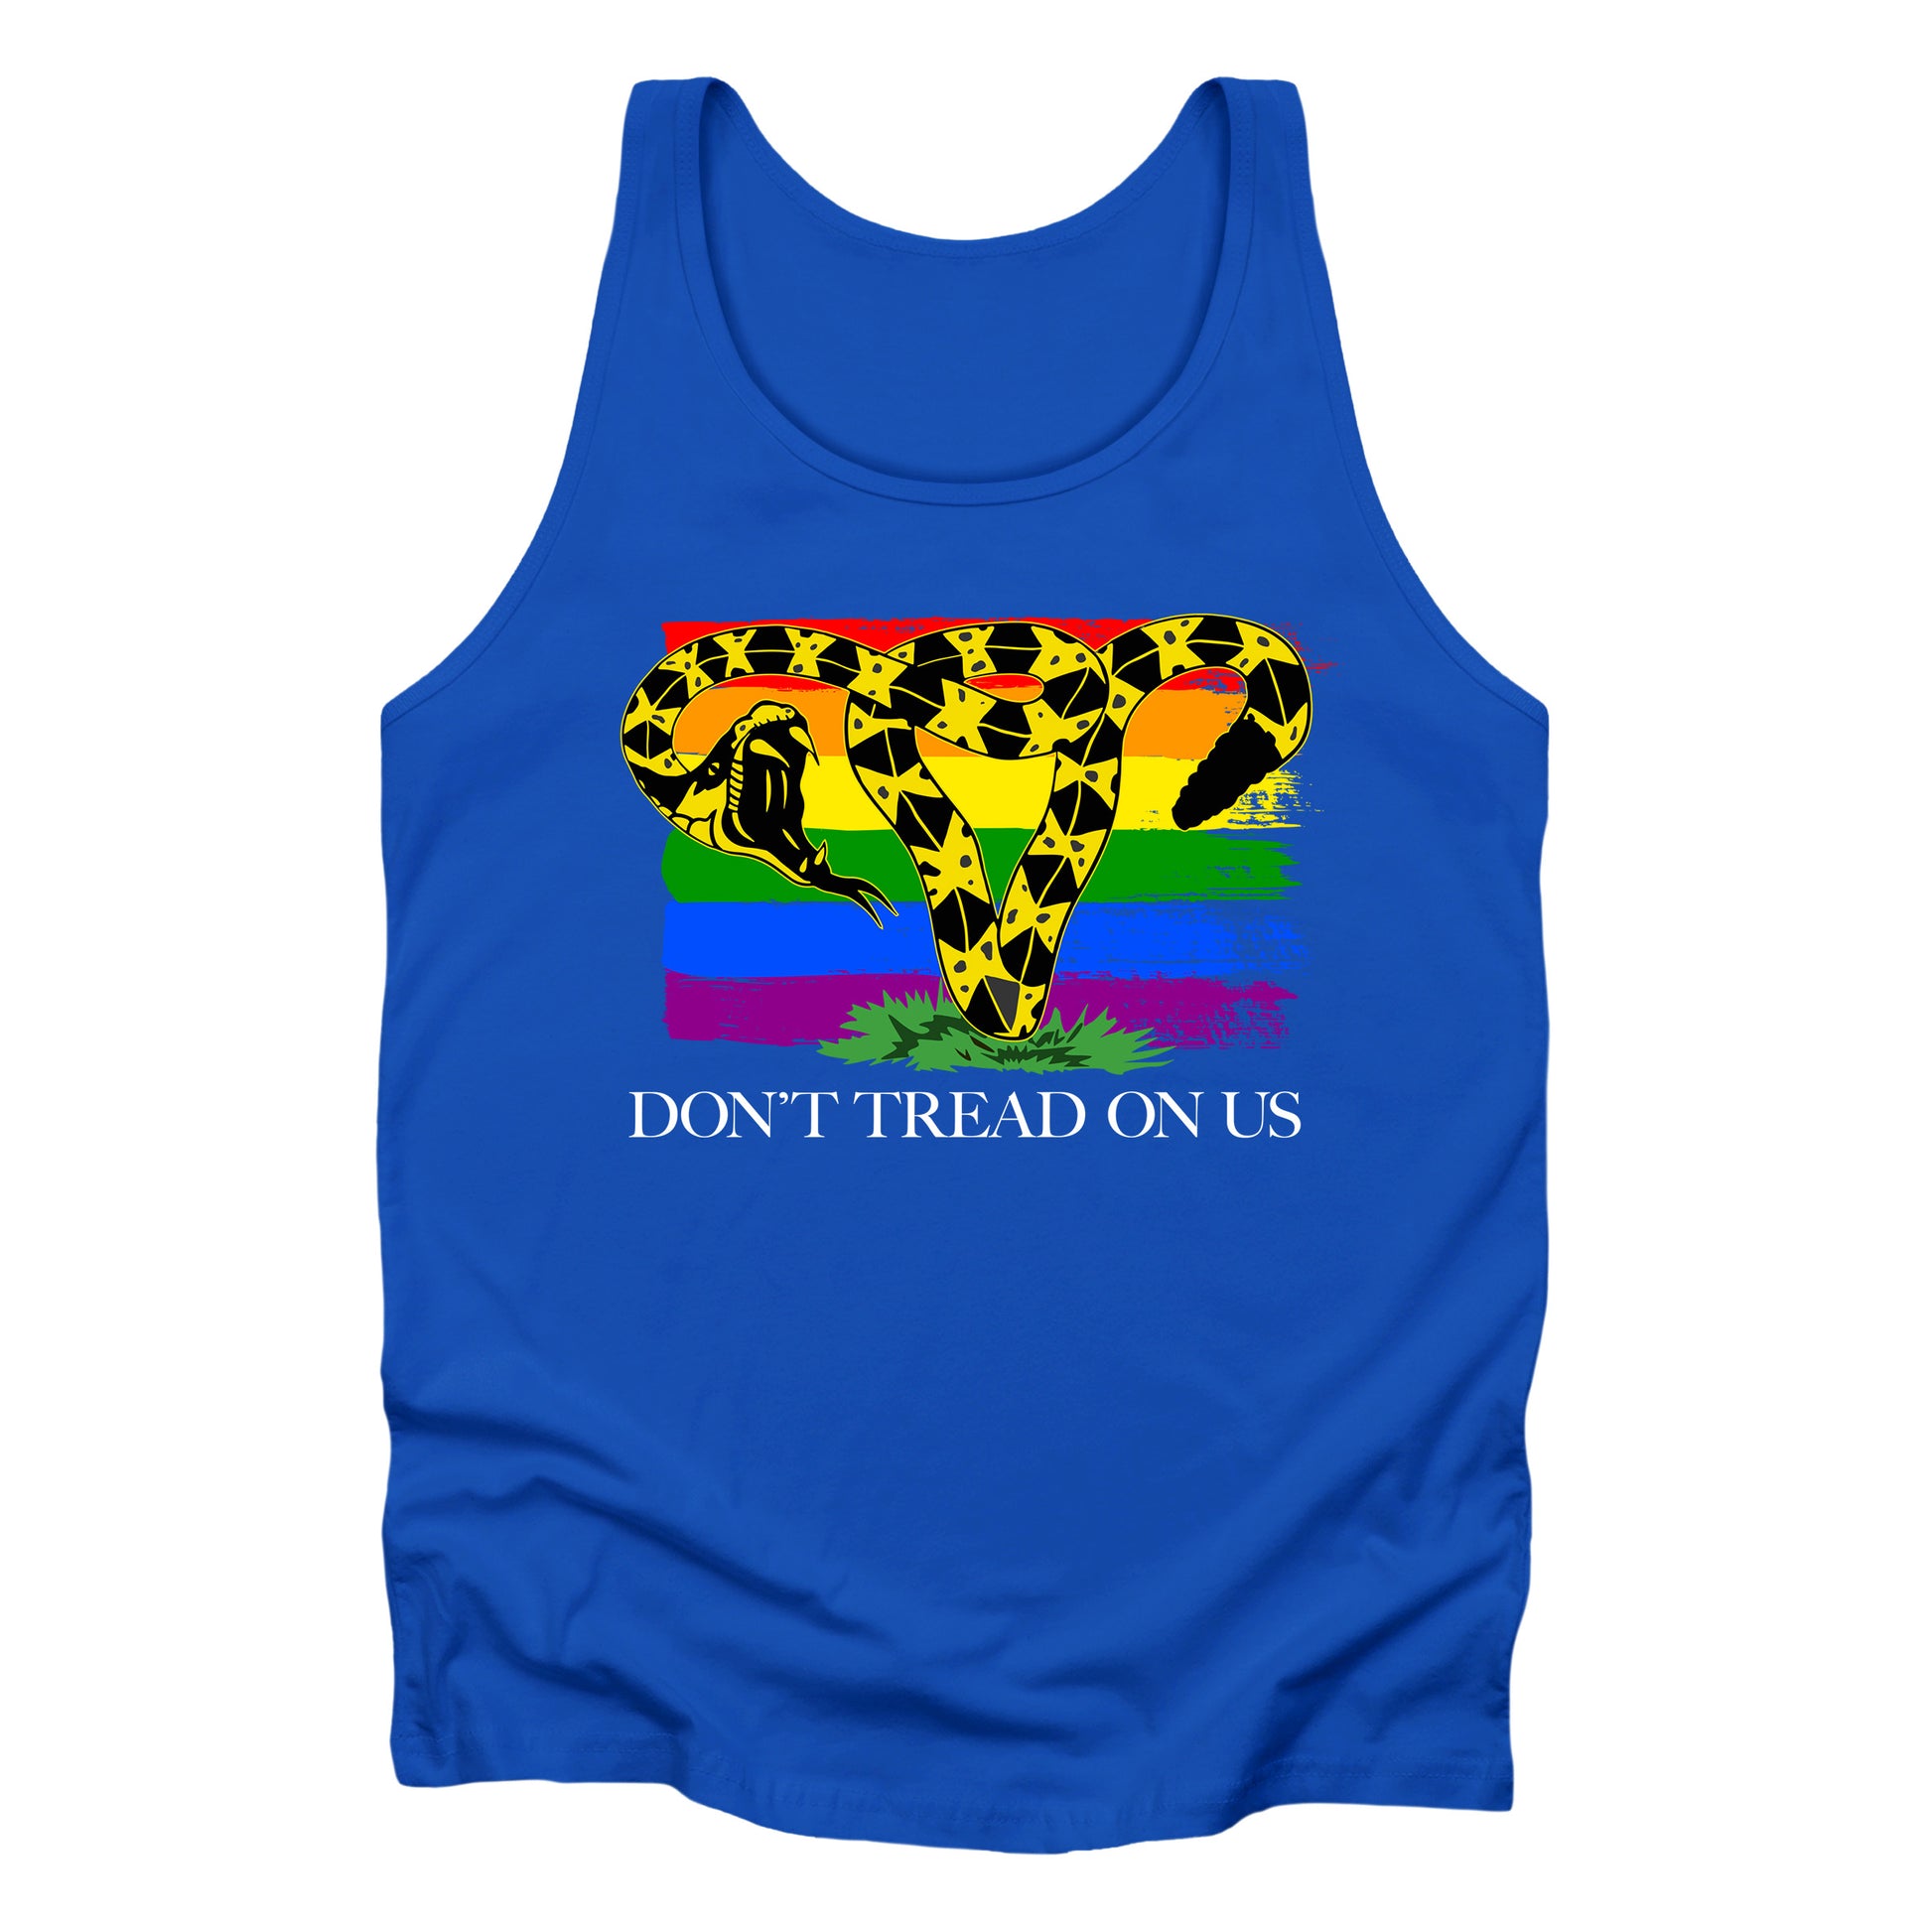 True Royal color unisex tank top with the “Don’t tread on me” snake redrawn into the shape of a uterus. A rainbow flag is painted in the background. Underneath the image reads “Don’t tread on us” in all caps.